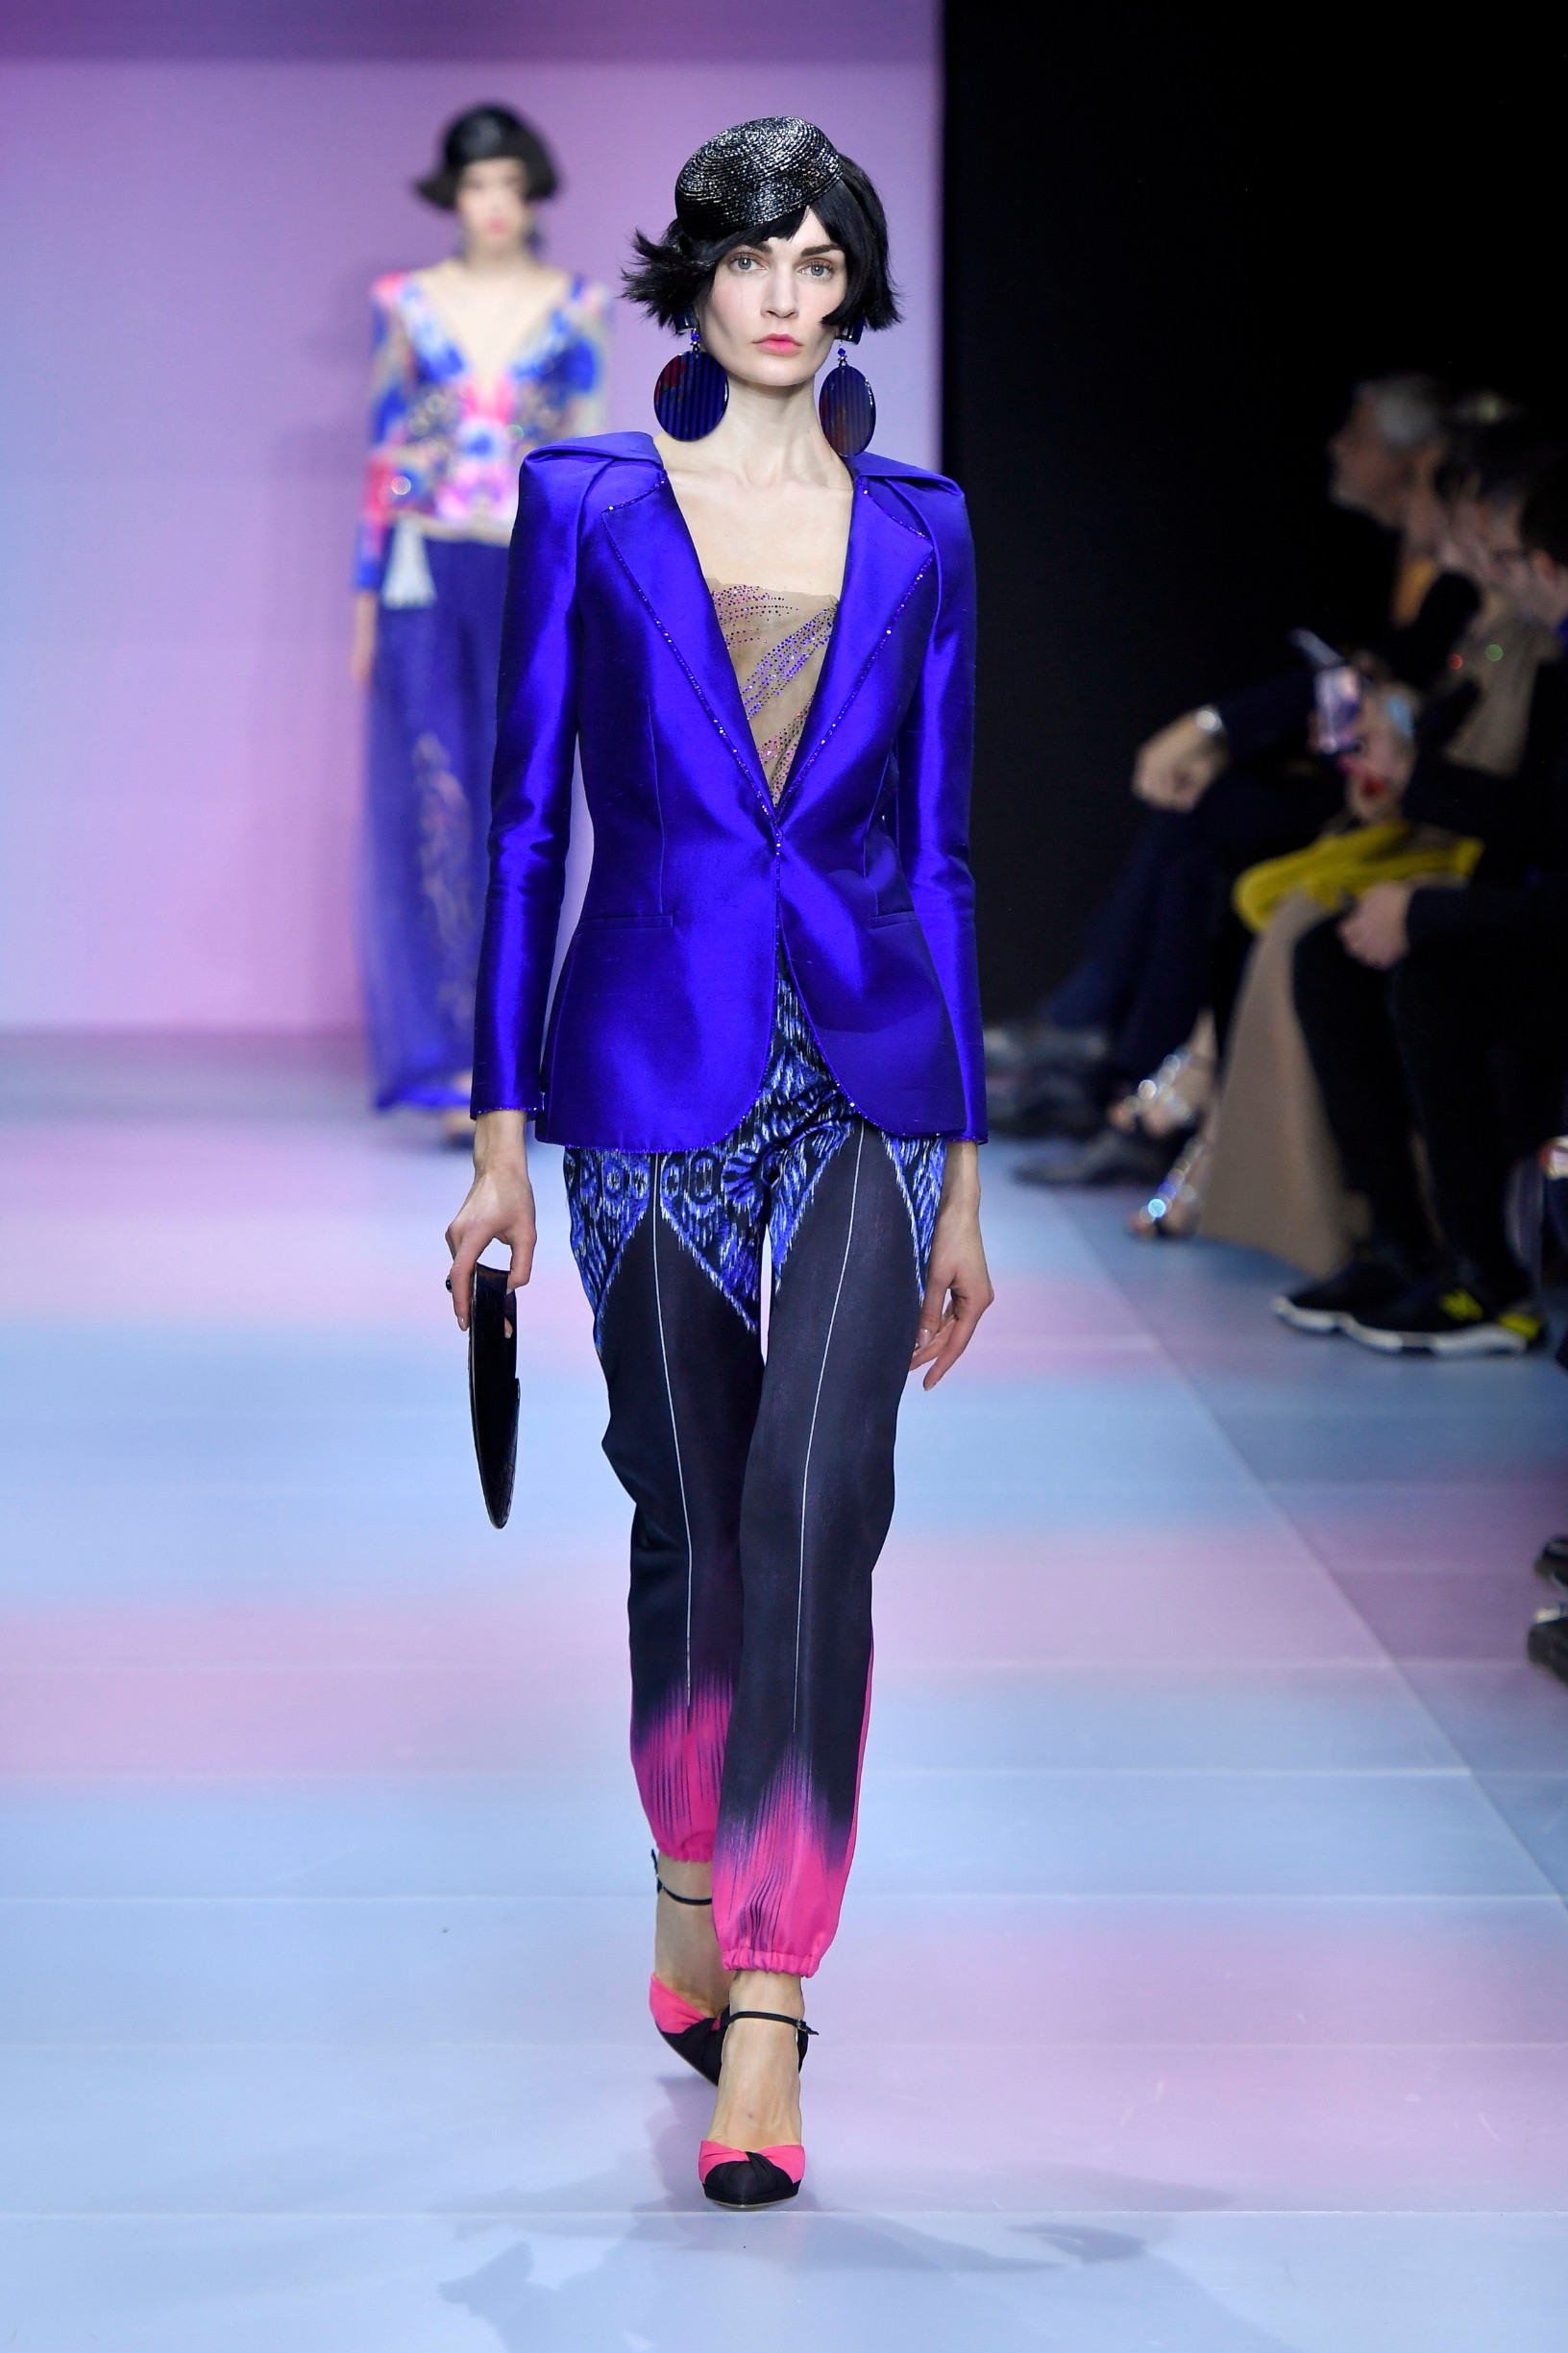 Model walks on the runway during the Giorgio Armani Prive  Haute Couture fashion show during Haute Couture Spring Summer  2020 in Paris, France on Jan. 21, 2020., Image: 494094255, License: Rights-managed, Restrictions: *** World Rights ***, Model Release: no, Credit line: Jonas Gustavsson / ddp USA / Profimedia